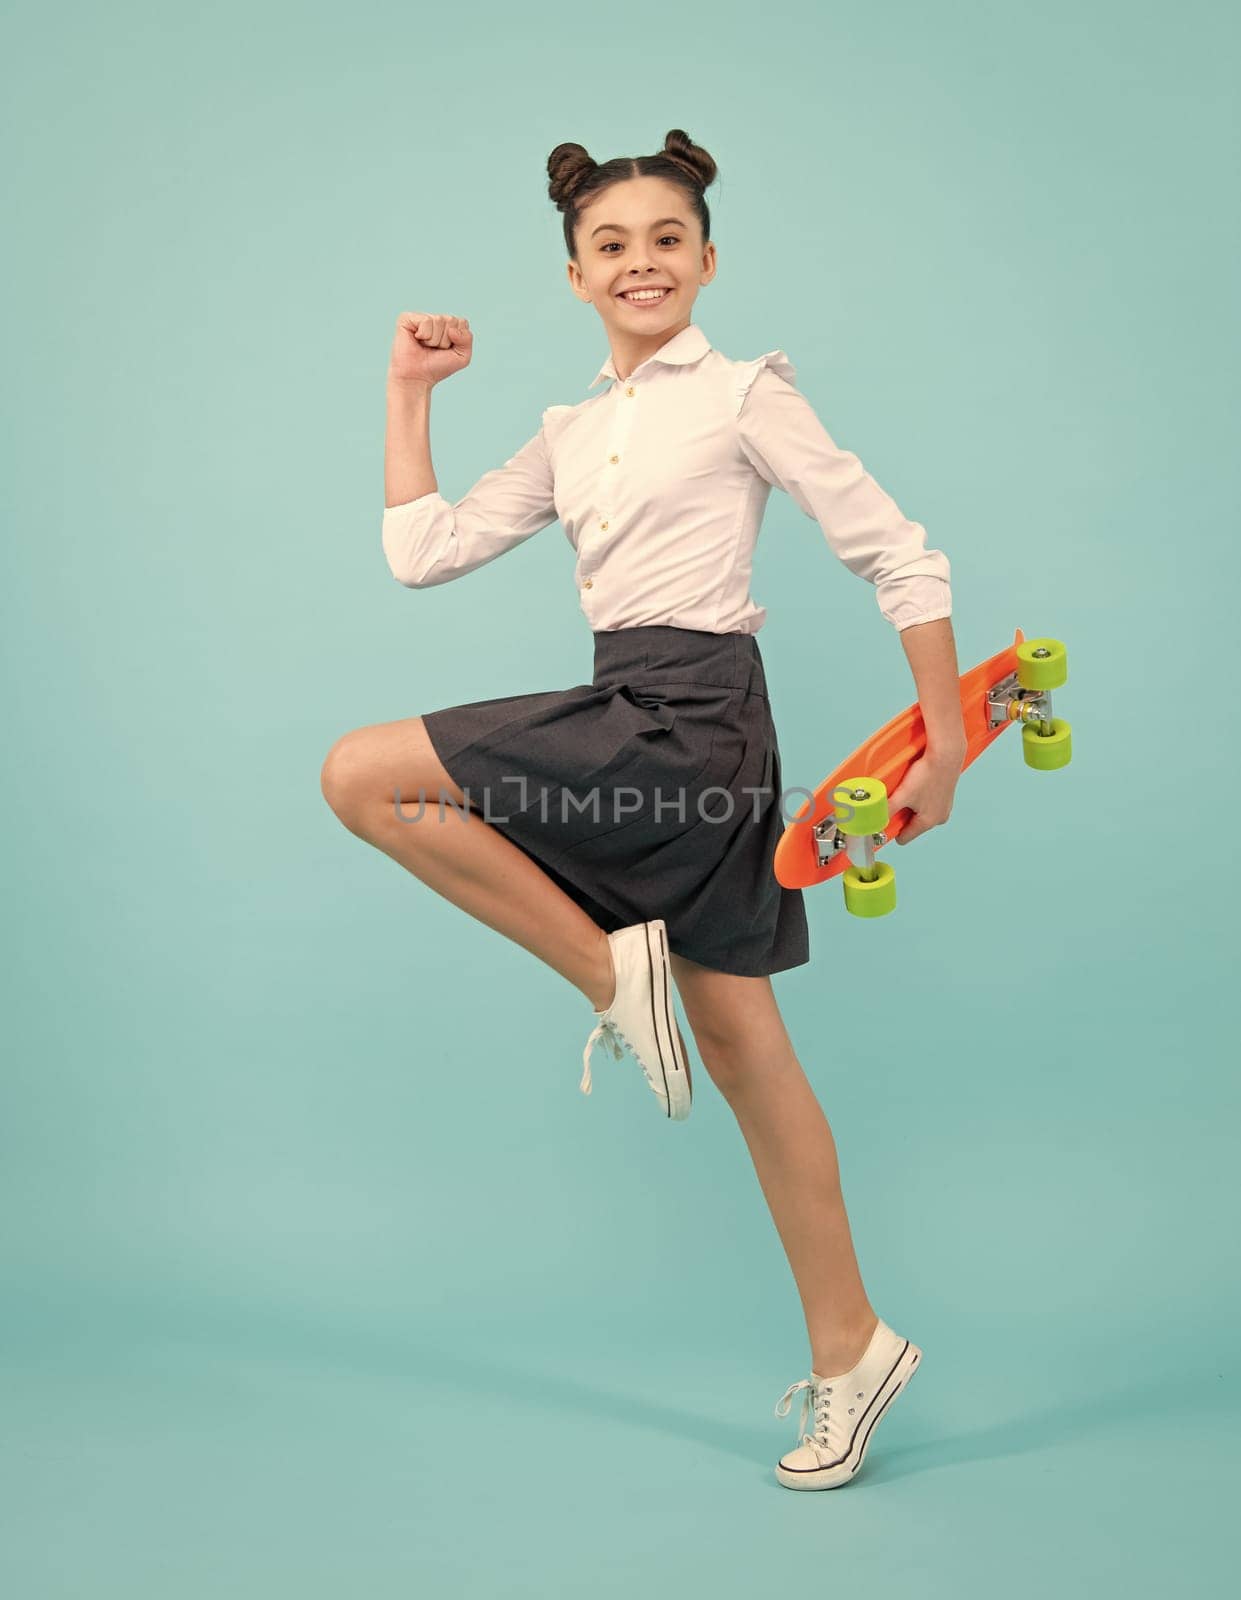 Teen girl 12, 13, 14 years old with skateboard over studio background. Cool modern teenager in stylish clothes. Teenagers lifestyle, casual youth culture